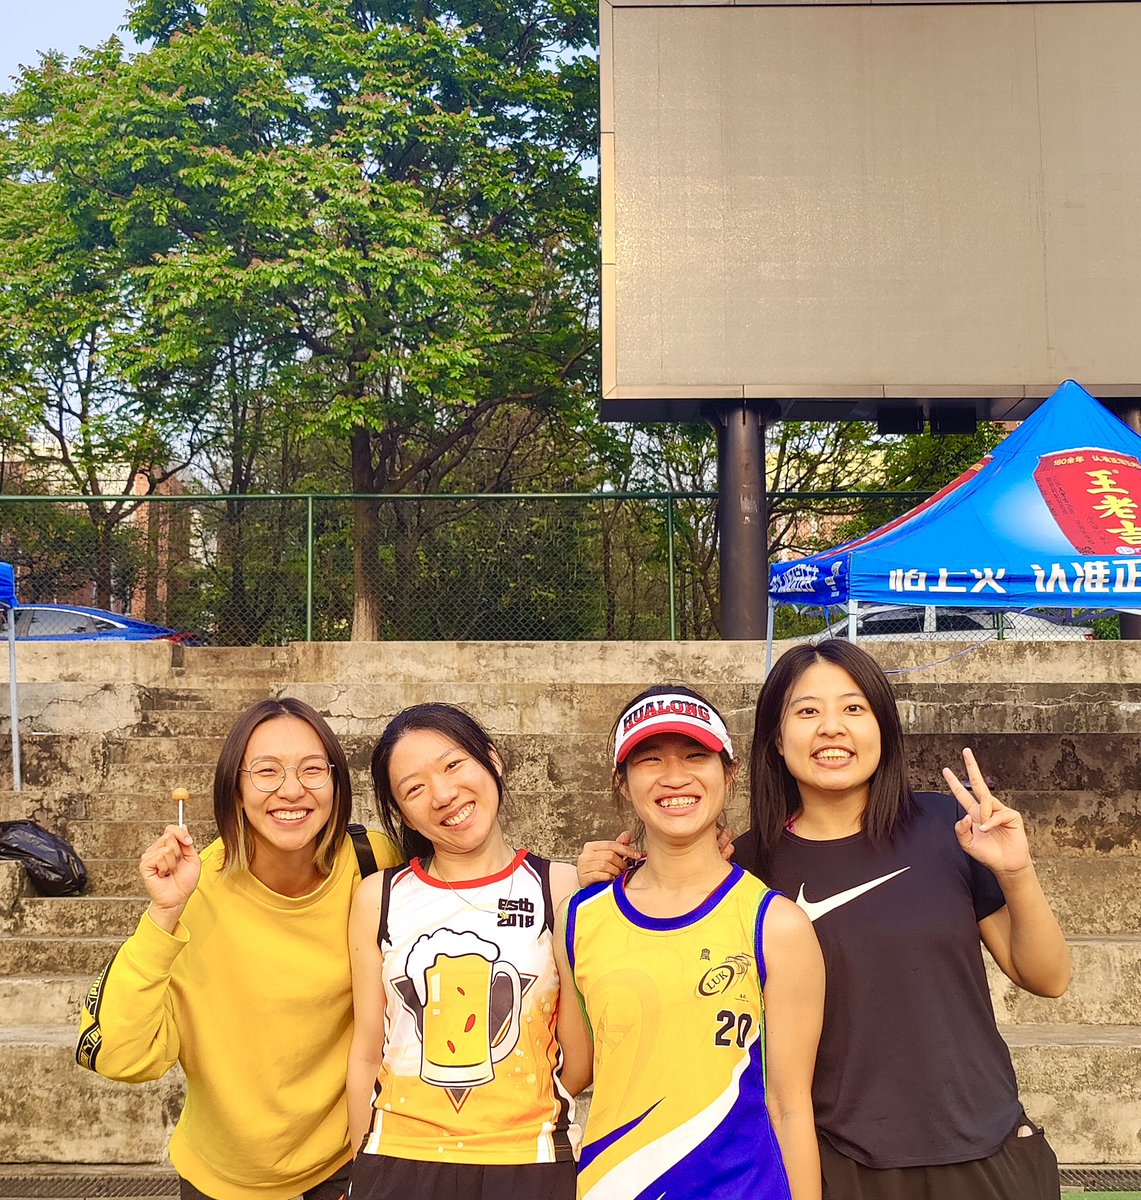 Happy moment🥳🥳
Happy yesterday 🥰🥰
Happy weekend🌞🌞
Best teammates 👍🏻👍🏻
#touchfootball